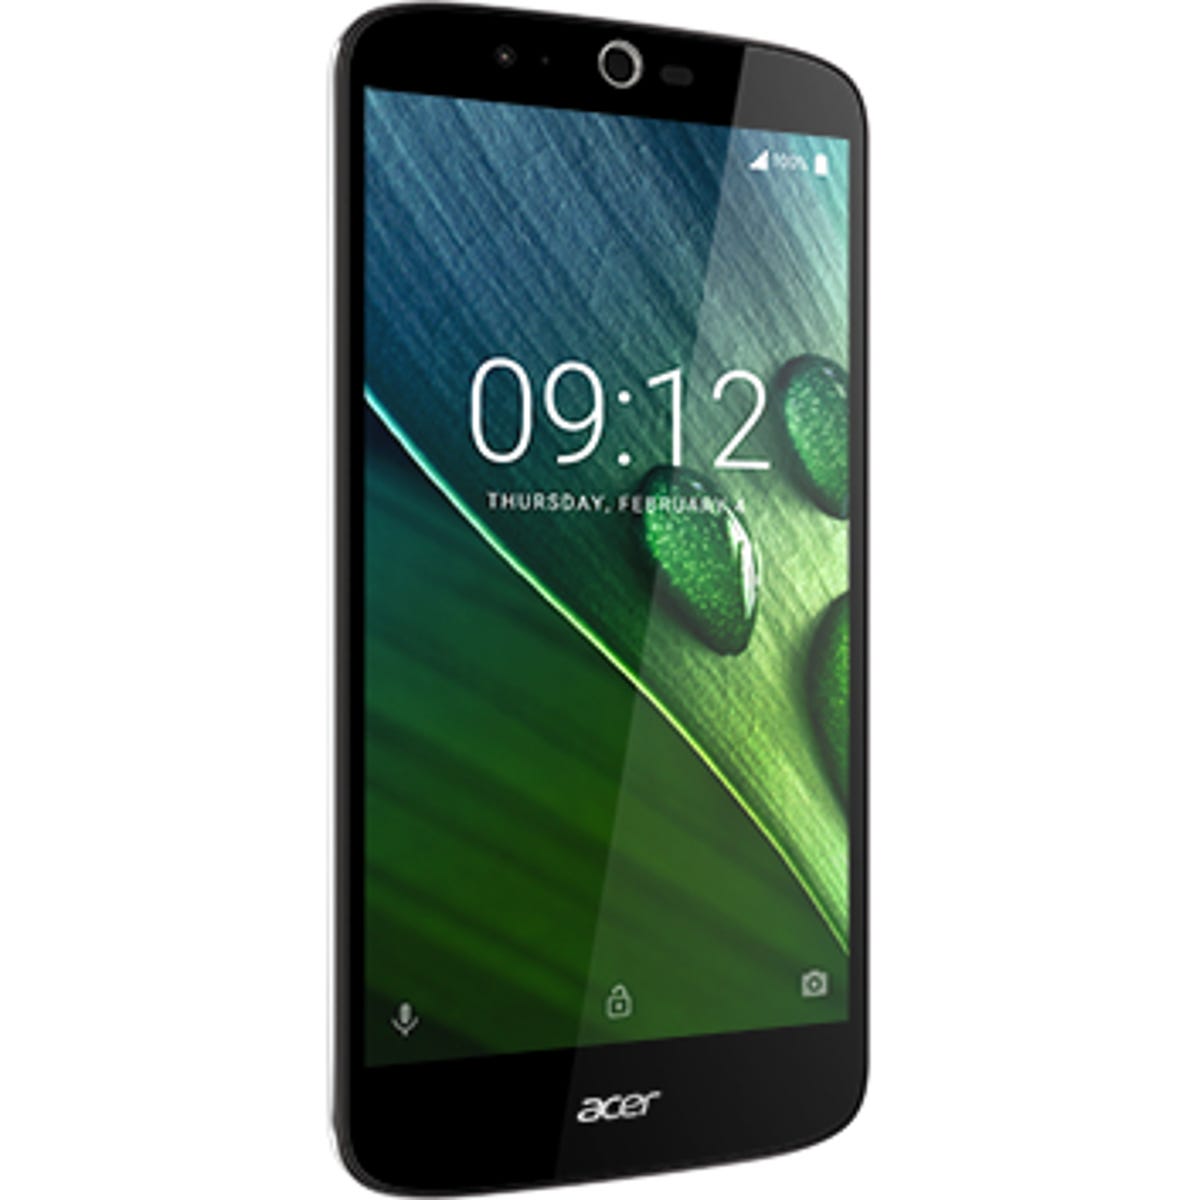 Computex 2016: Acer arrives with 5,000mAh handset, laptops, and